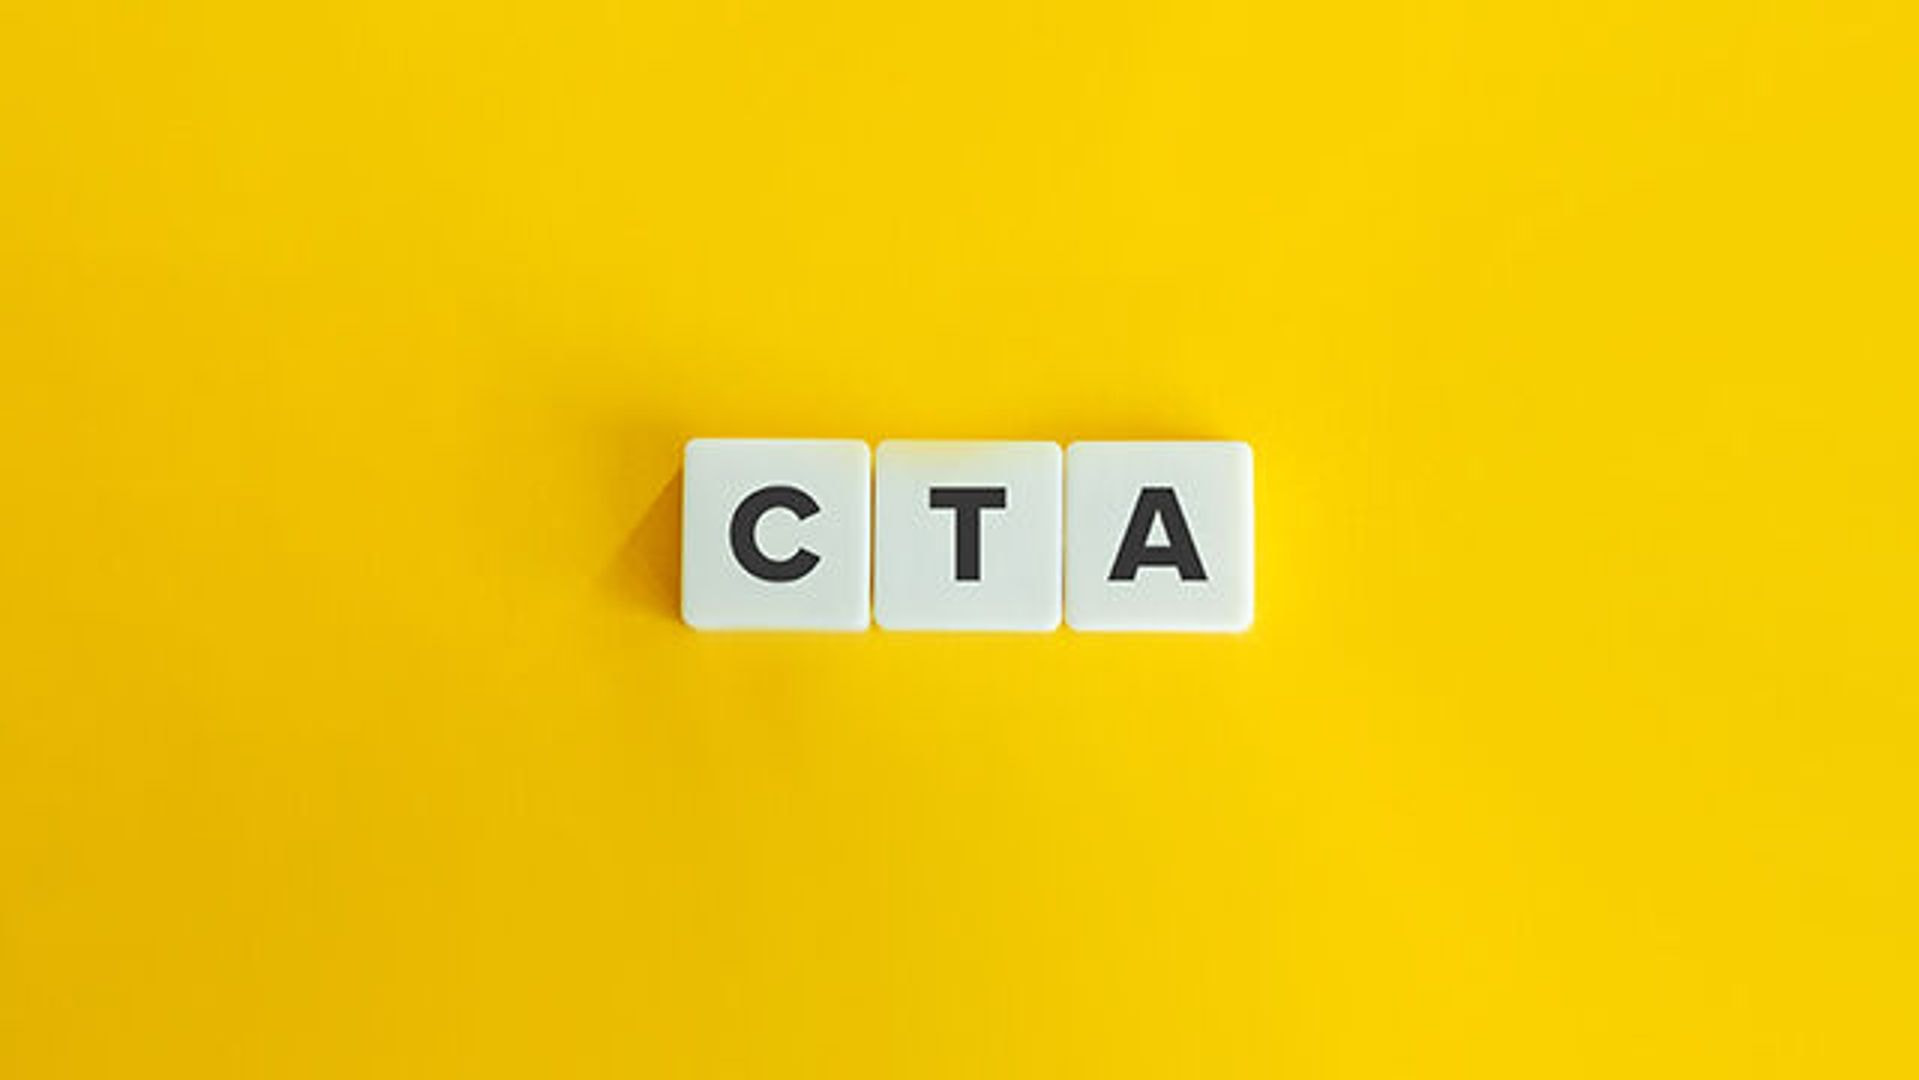 WHAT IS eCommerce CTA AND WHY IS IT IMPORTANT?